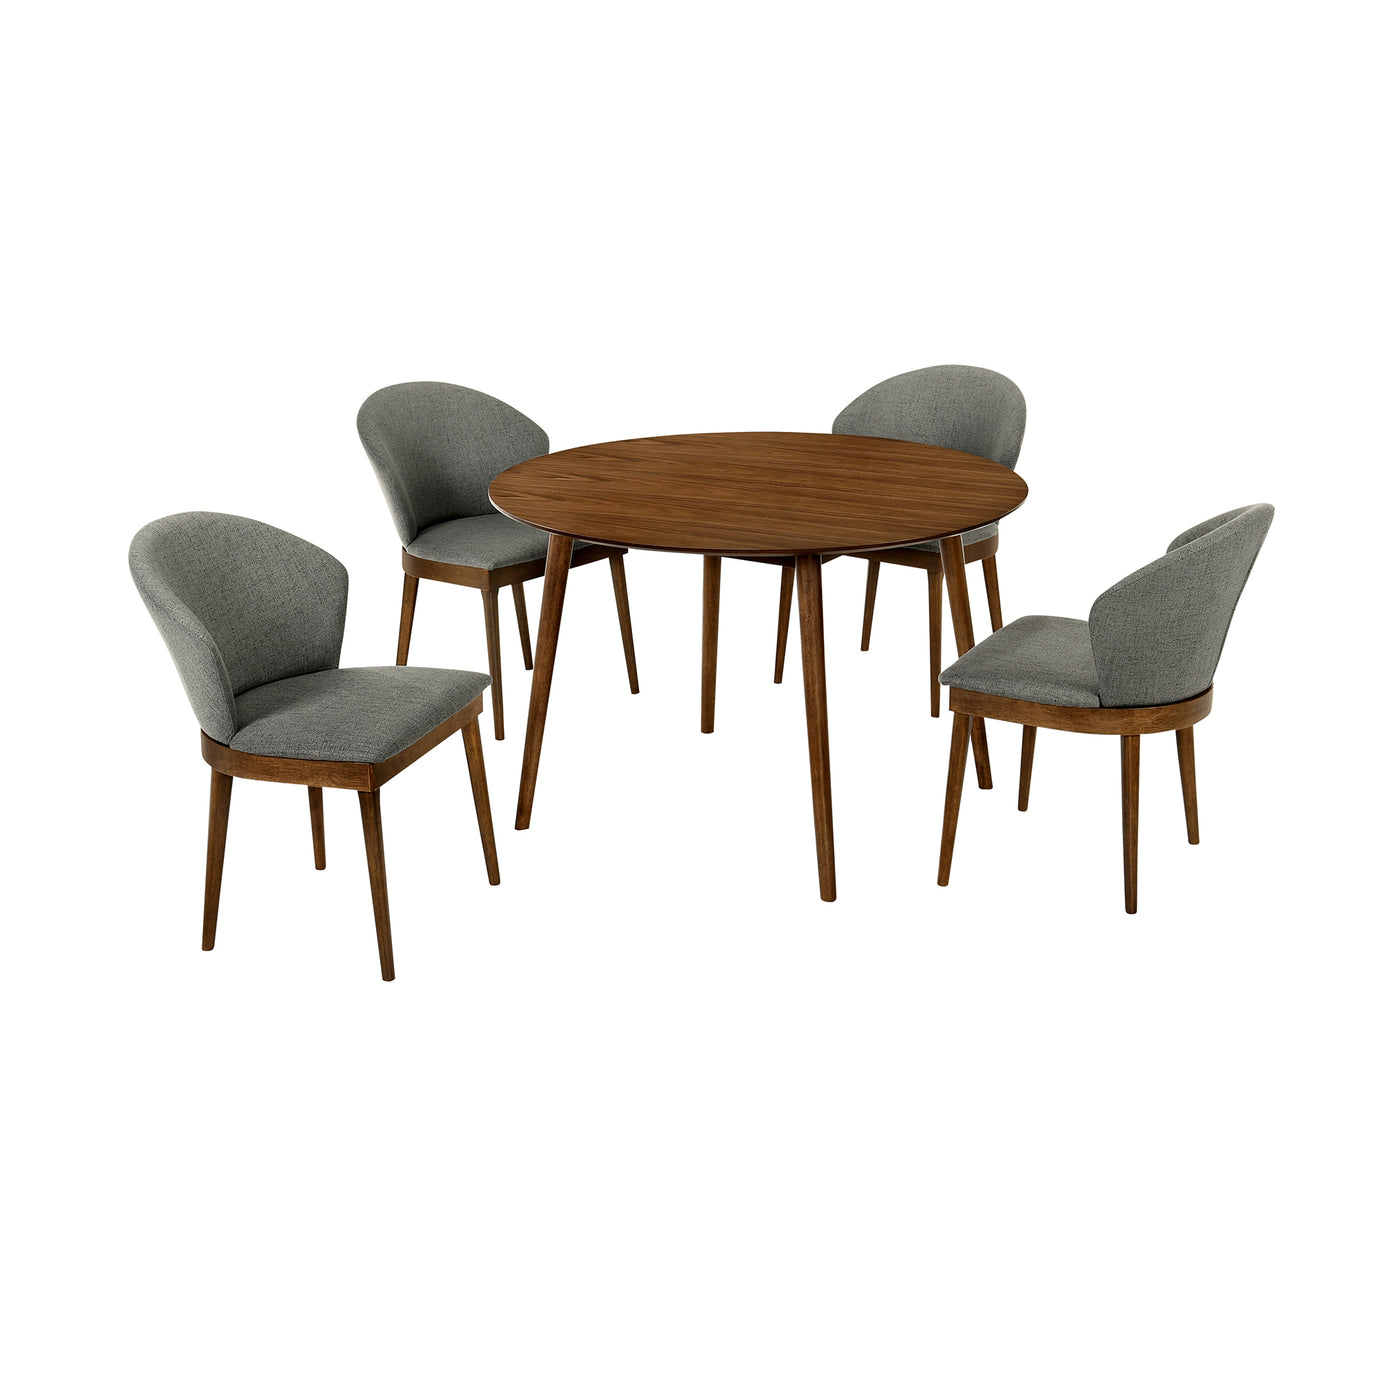 Arcadia and Juno 48 in. 5-Piece Dining Set